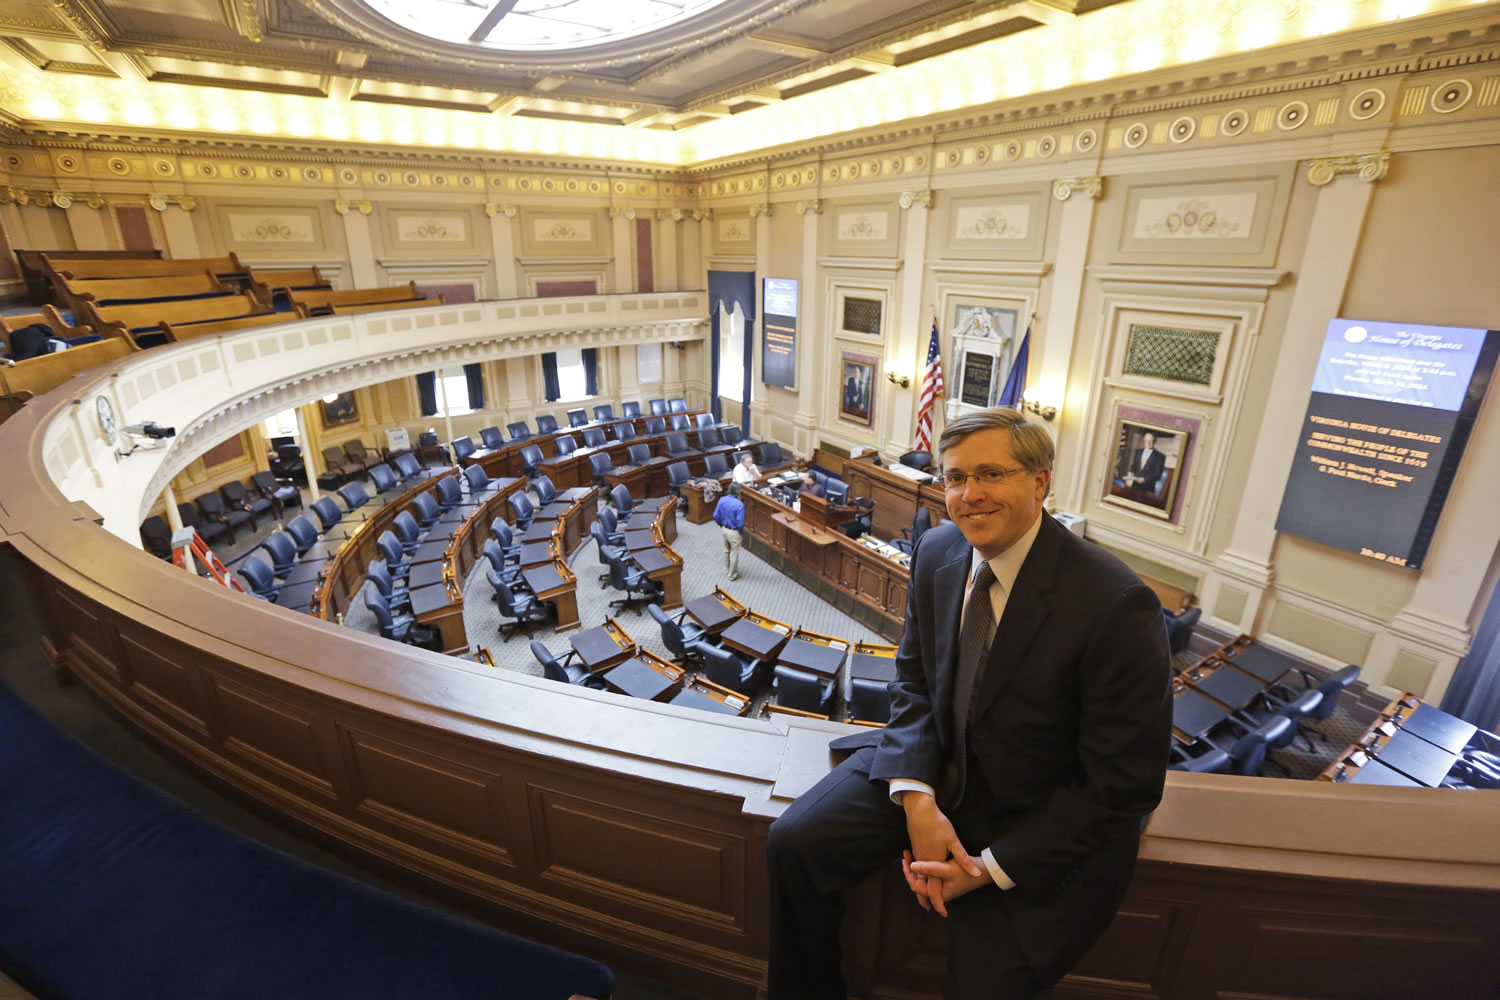 Chris Jankowski, the architect of the GOP's gerrymandering effort in Virginia, poses in the Gallery of the Virginia House of Delegates at the Capitol in Richmond, Va.